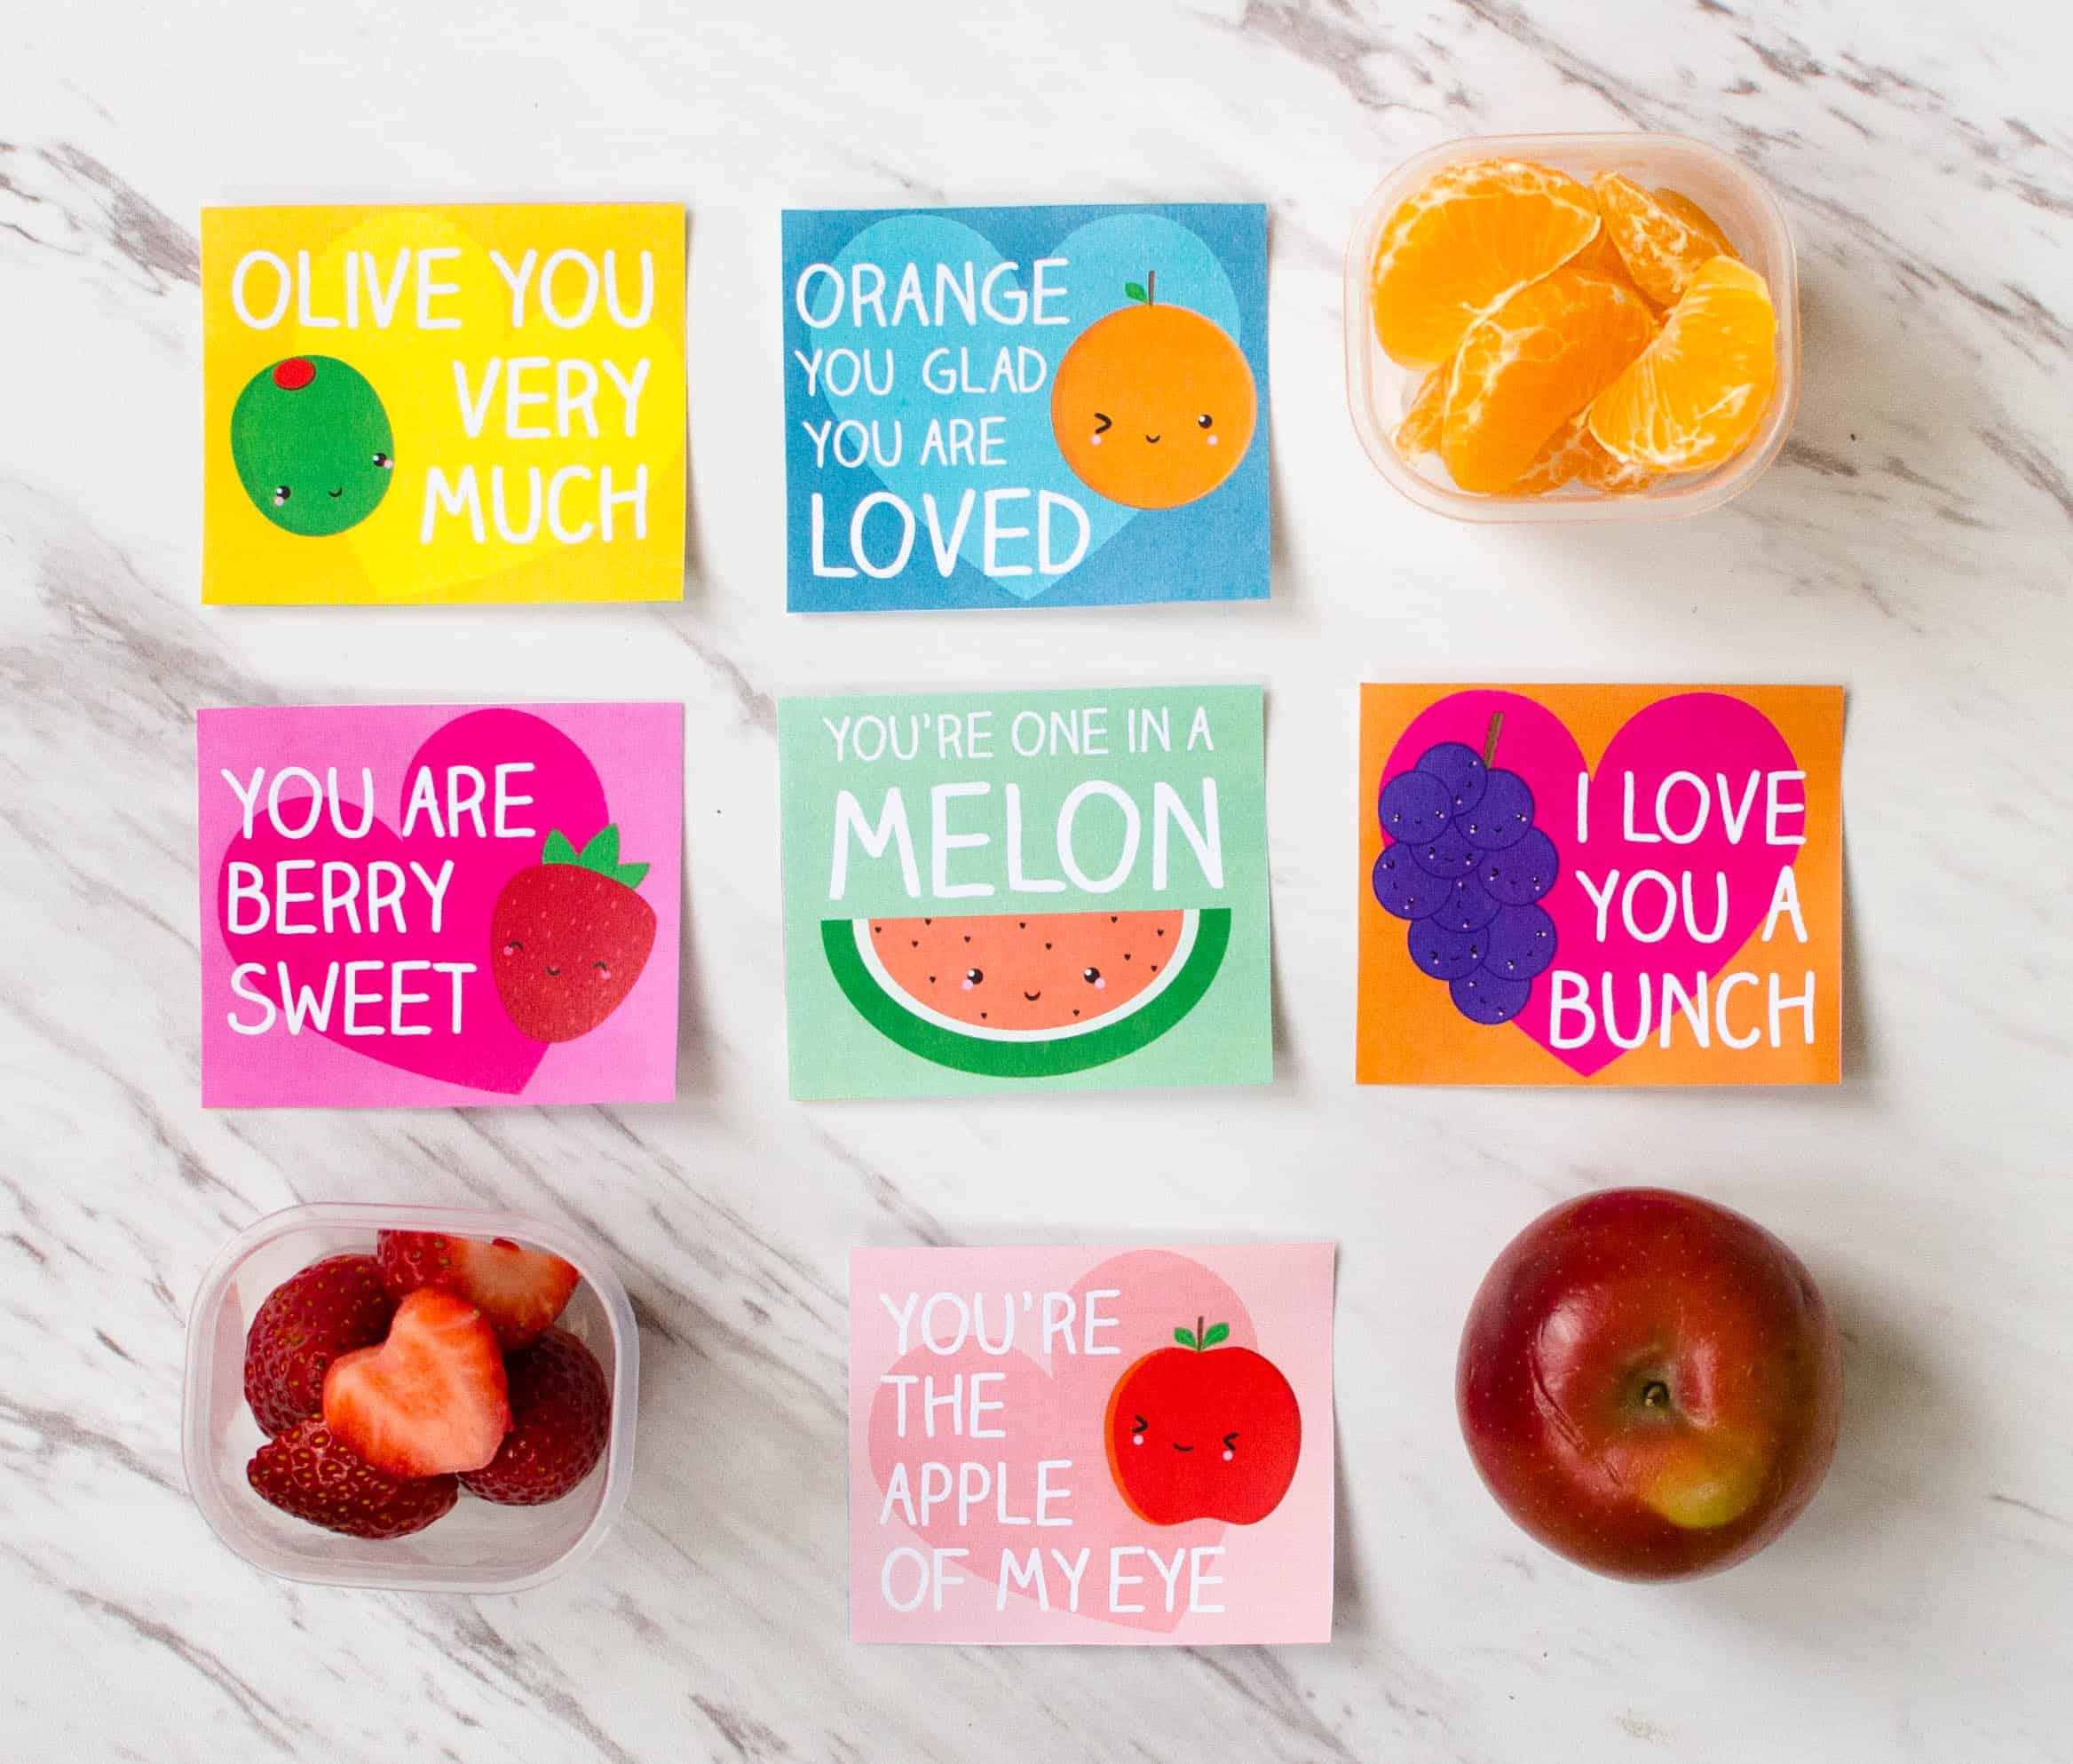 Super-cute free printable lunch box love notes for kids. Download and print these in time to slip them in your kid's lunchbox. #ValentinesPrintables #FreePrintable